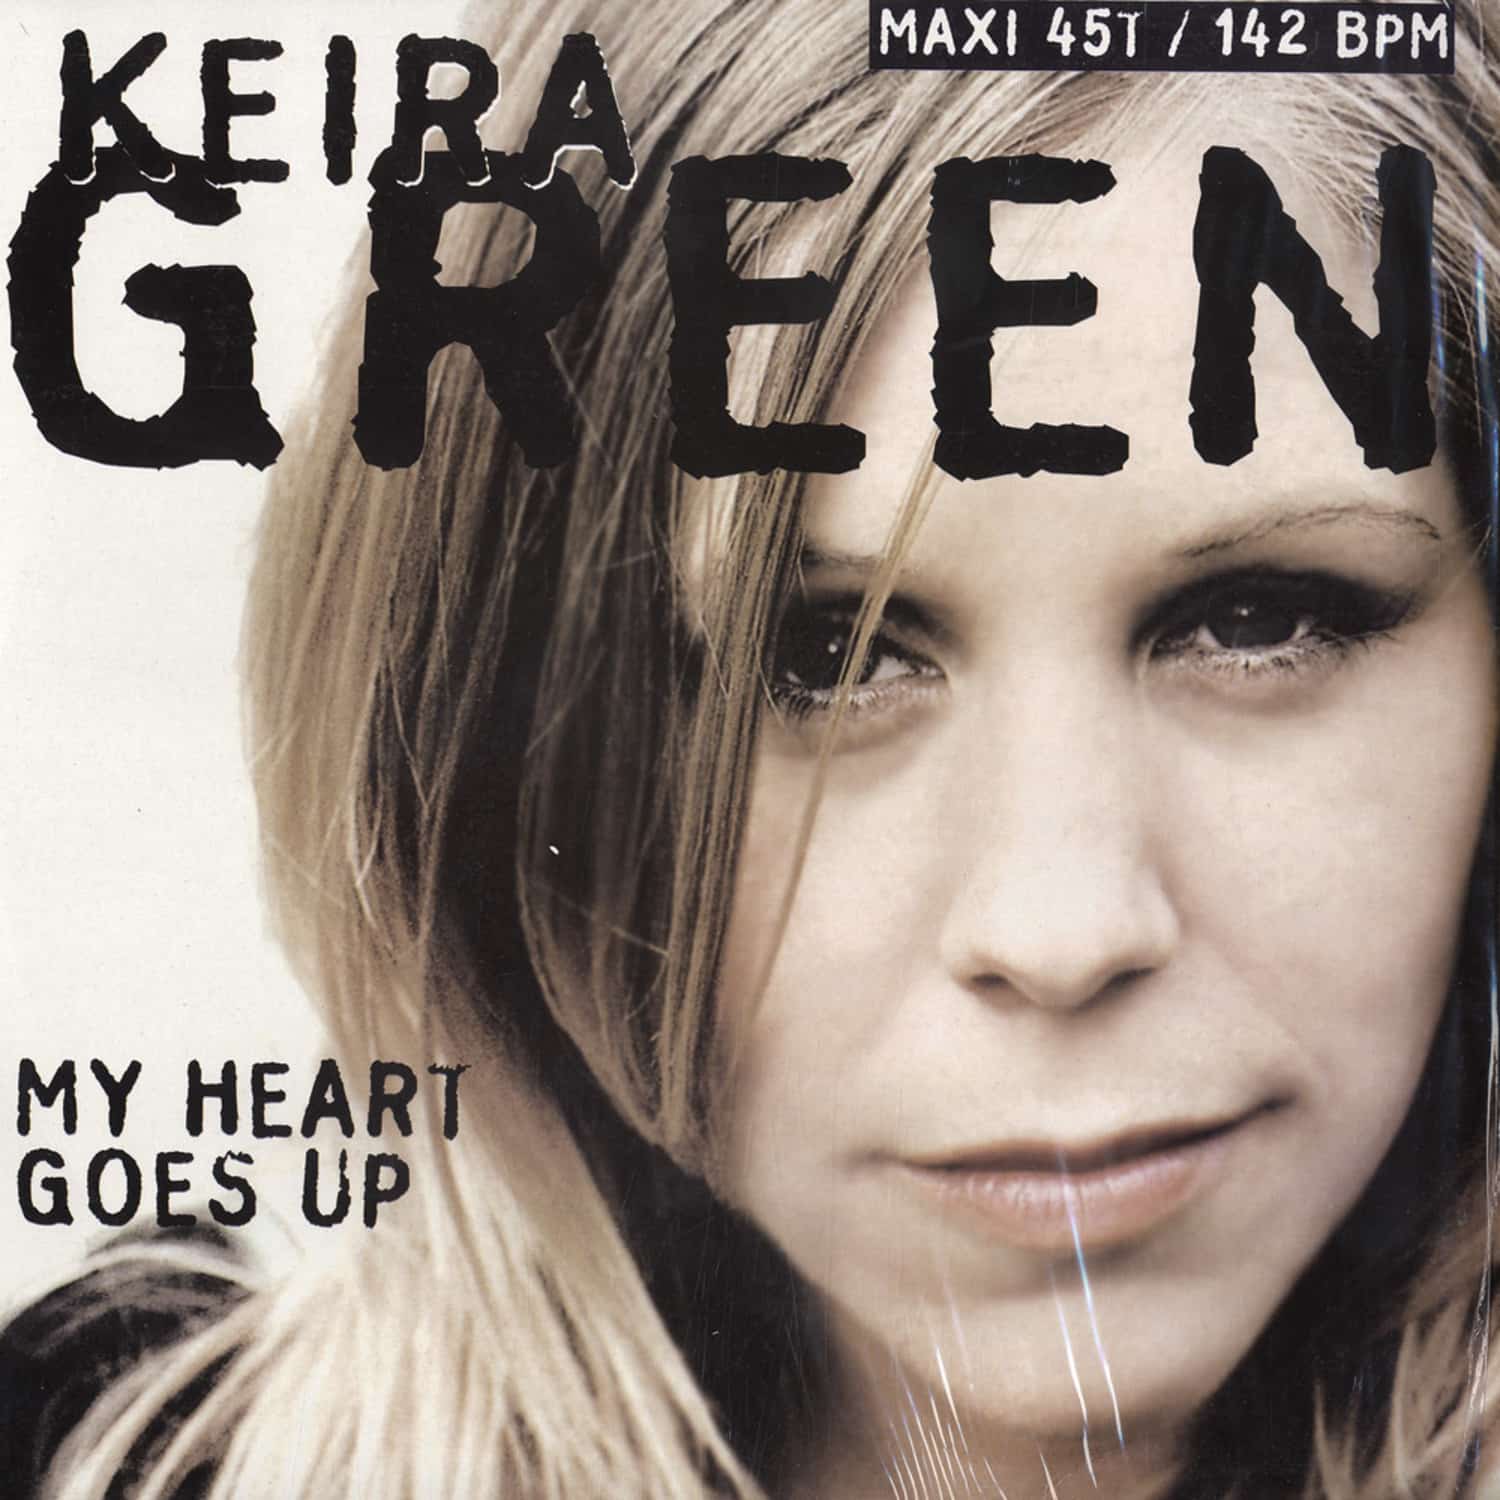 Keira Green - MY HEART GOES UP